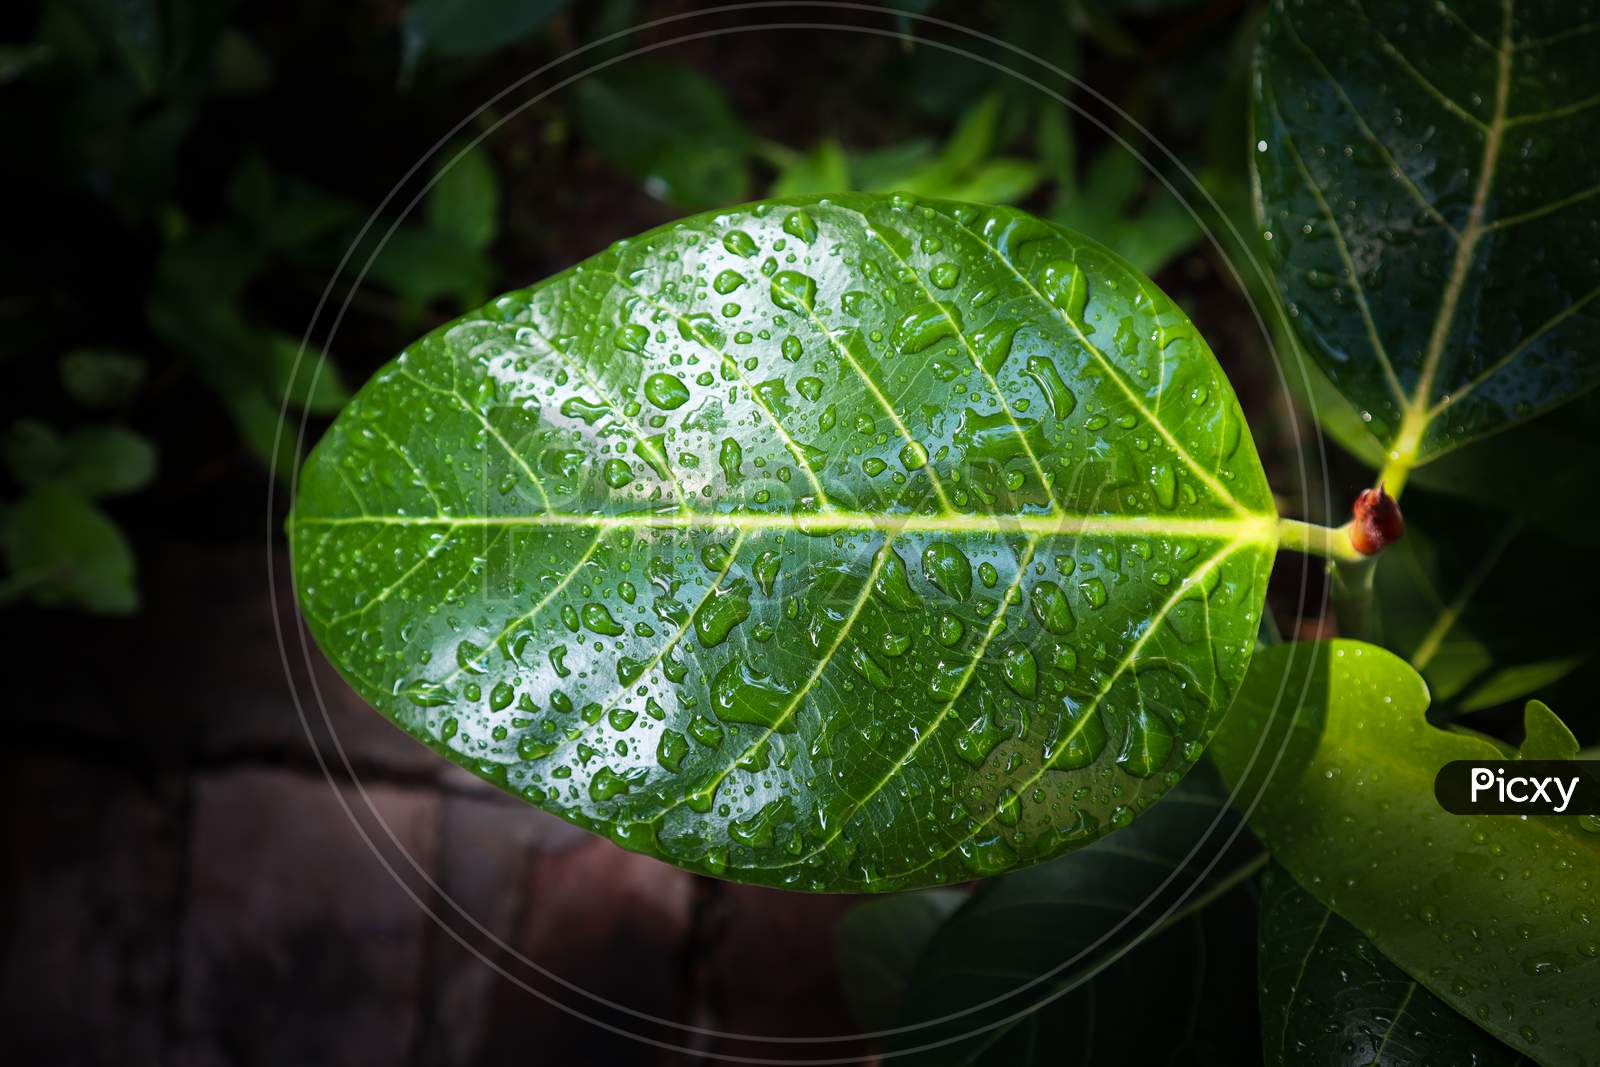 Rain Water Droplets On Green Leaf. Sparkling Drops From Sun Light. Beautiful Leaf Texture In Nature. Raining Outdoors. Big Foliage In Rain Forest. Nature Background.